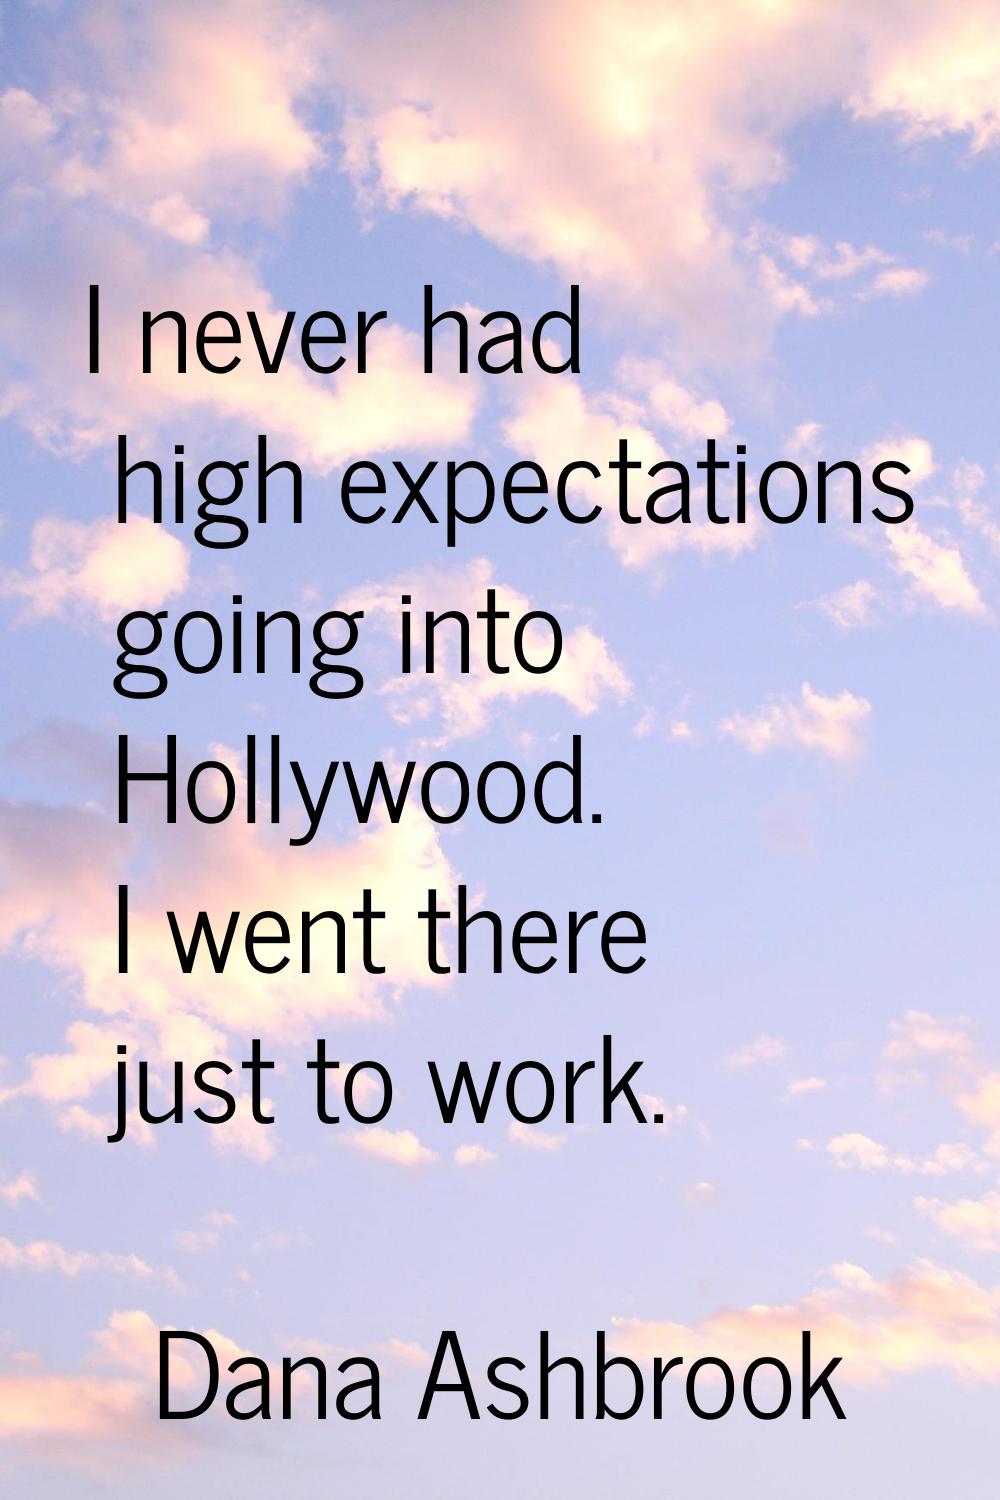 I never had high expectations going into Hollywood. I went there just to work.